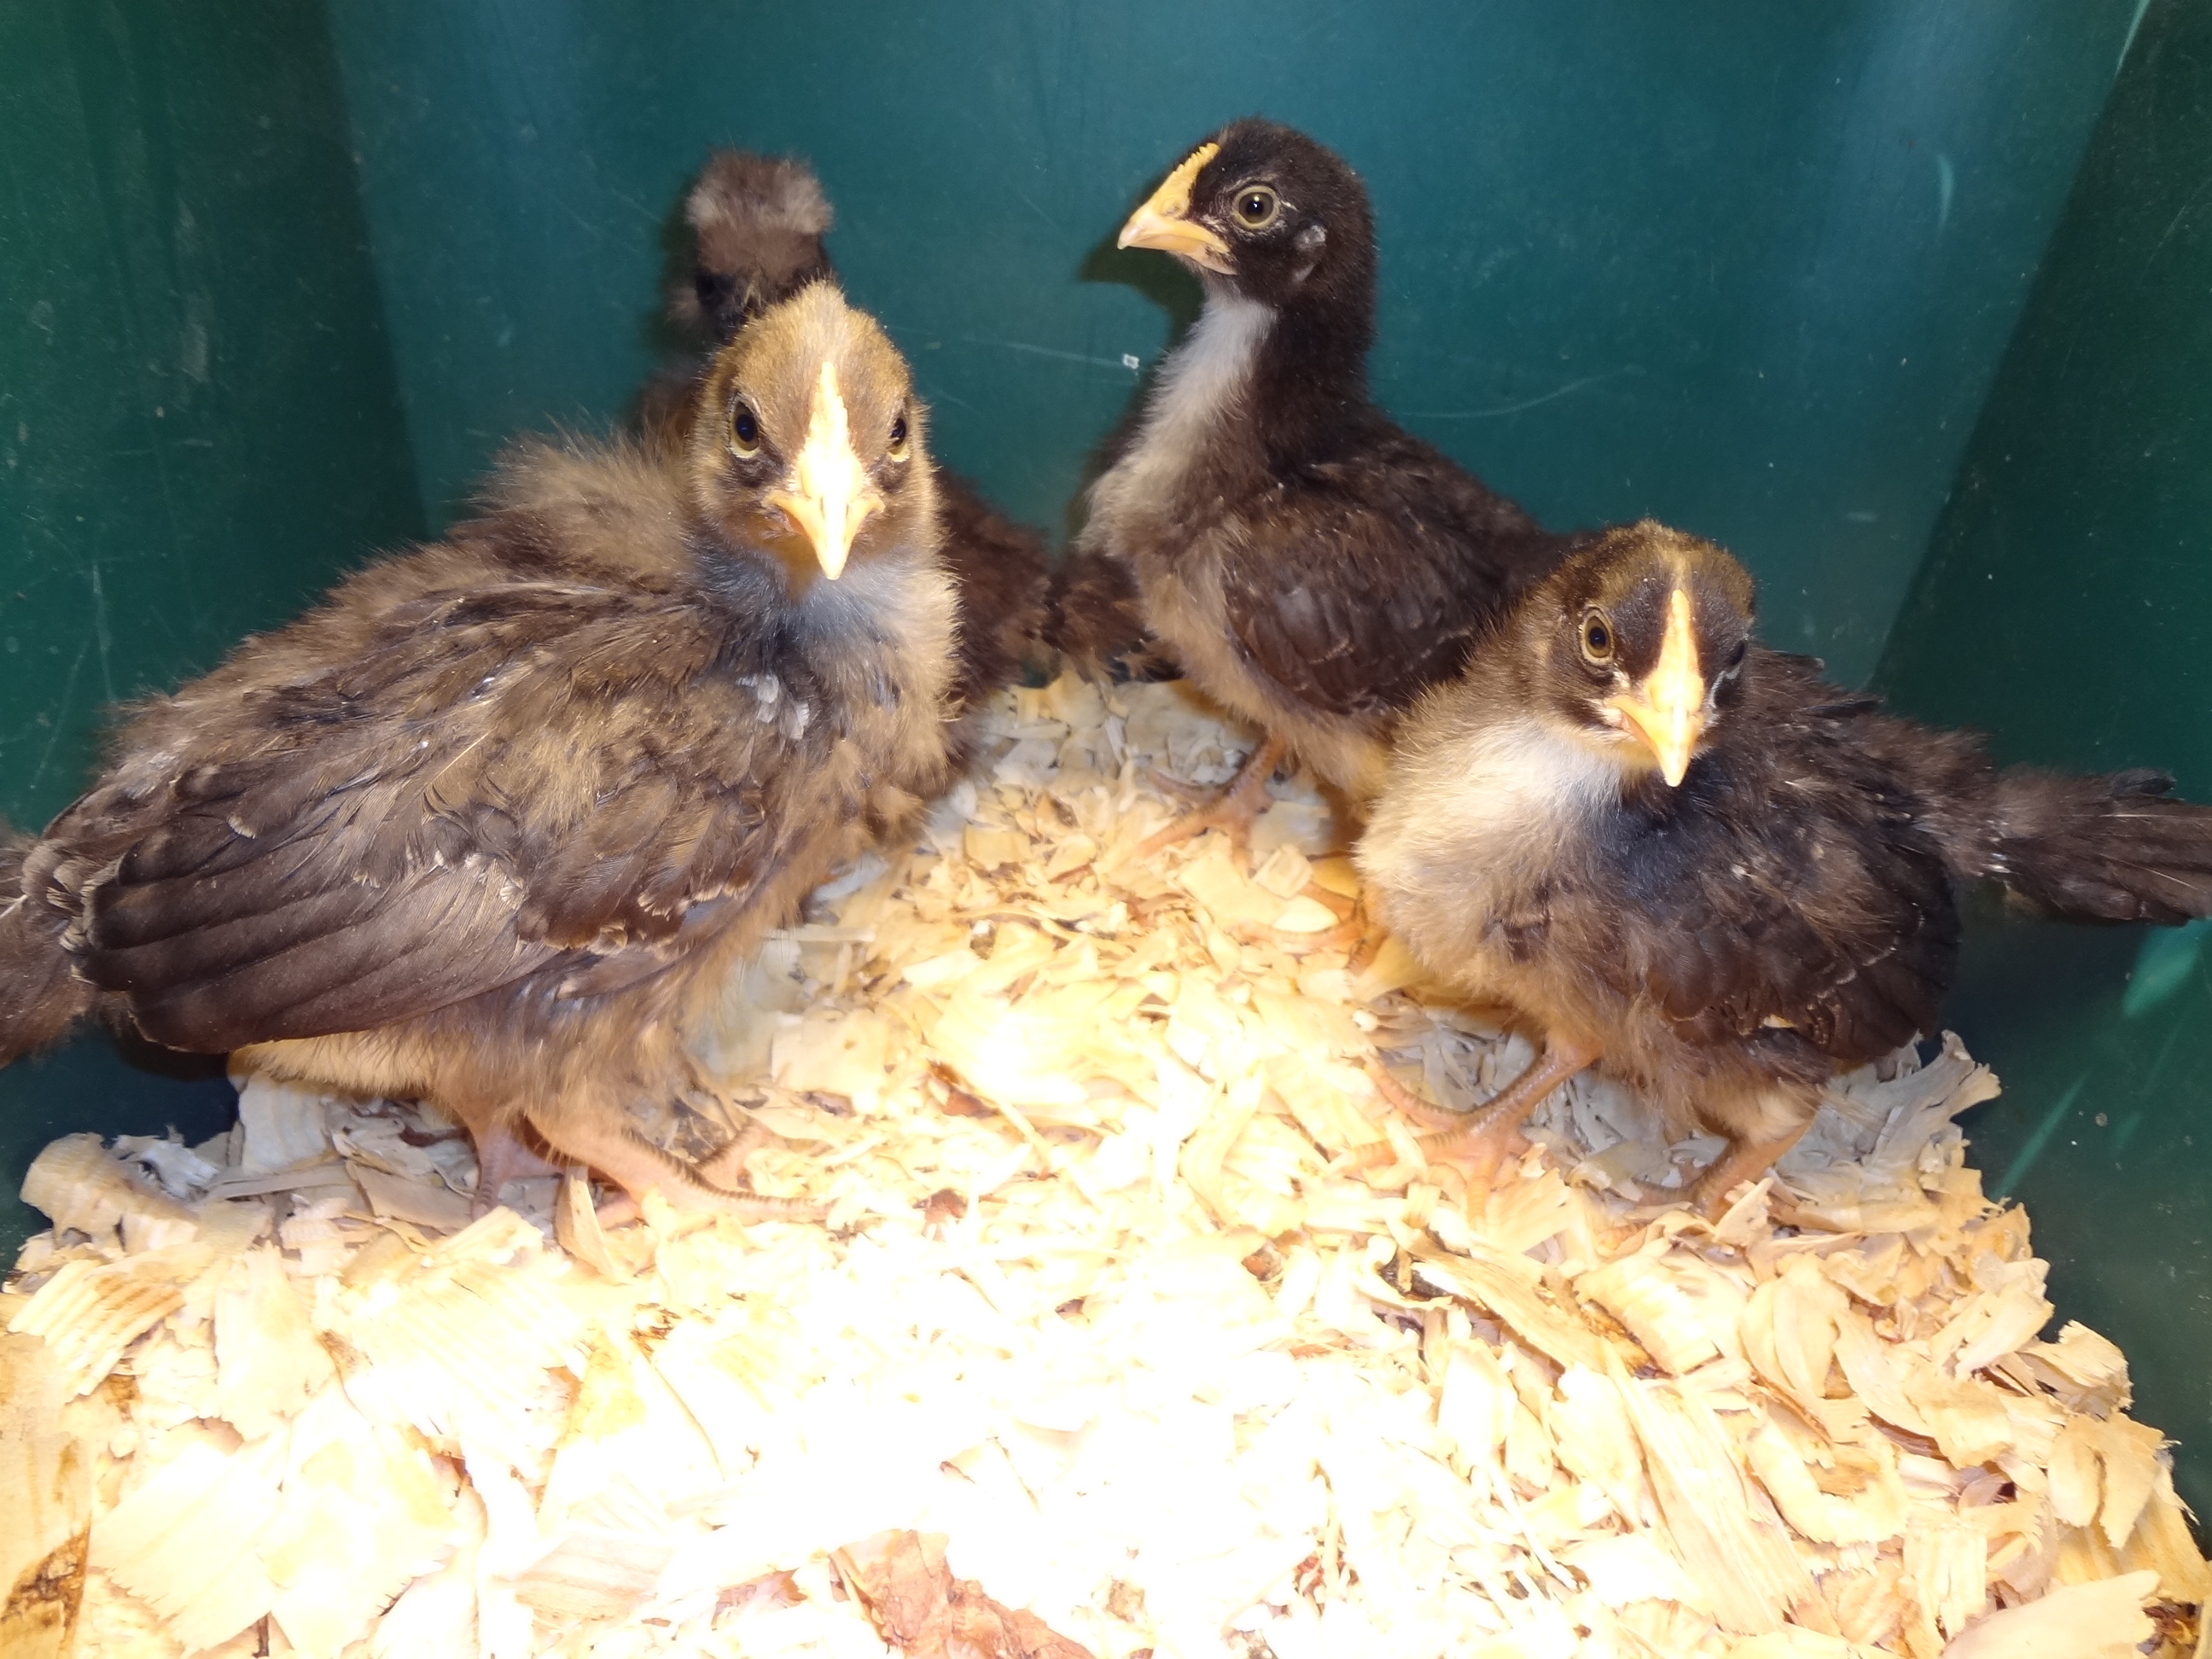 Three olive-egger chicks (with a show-girl chick in back ground)--picture taken  March 27, 2012.
Crossing my fingers for hens ;-)